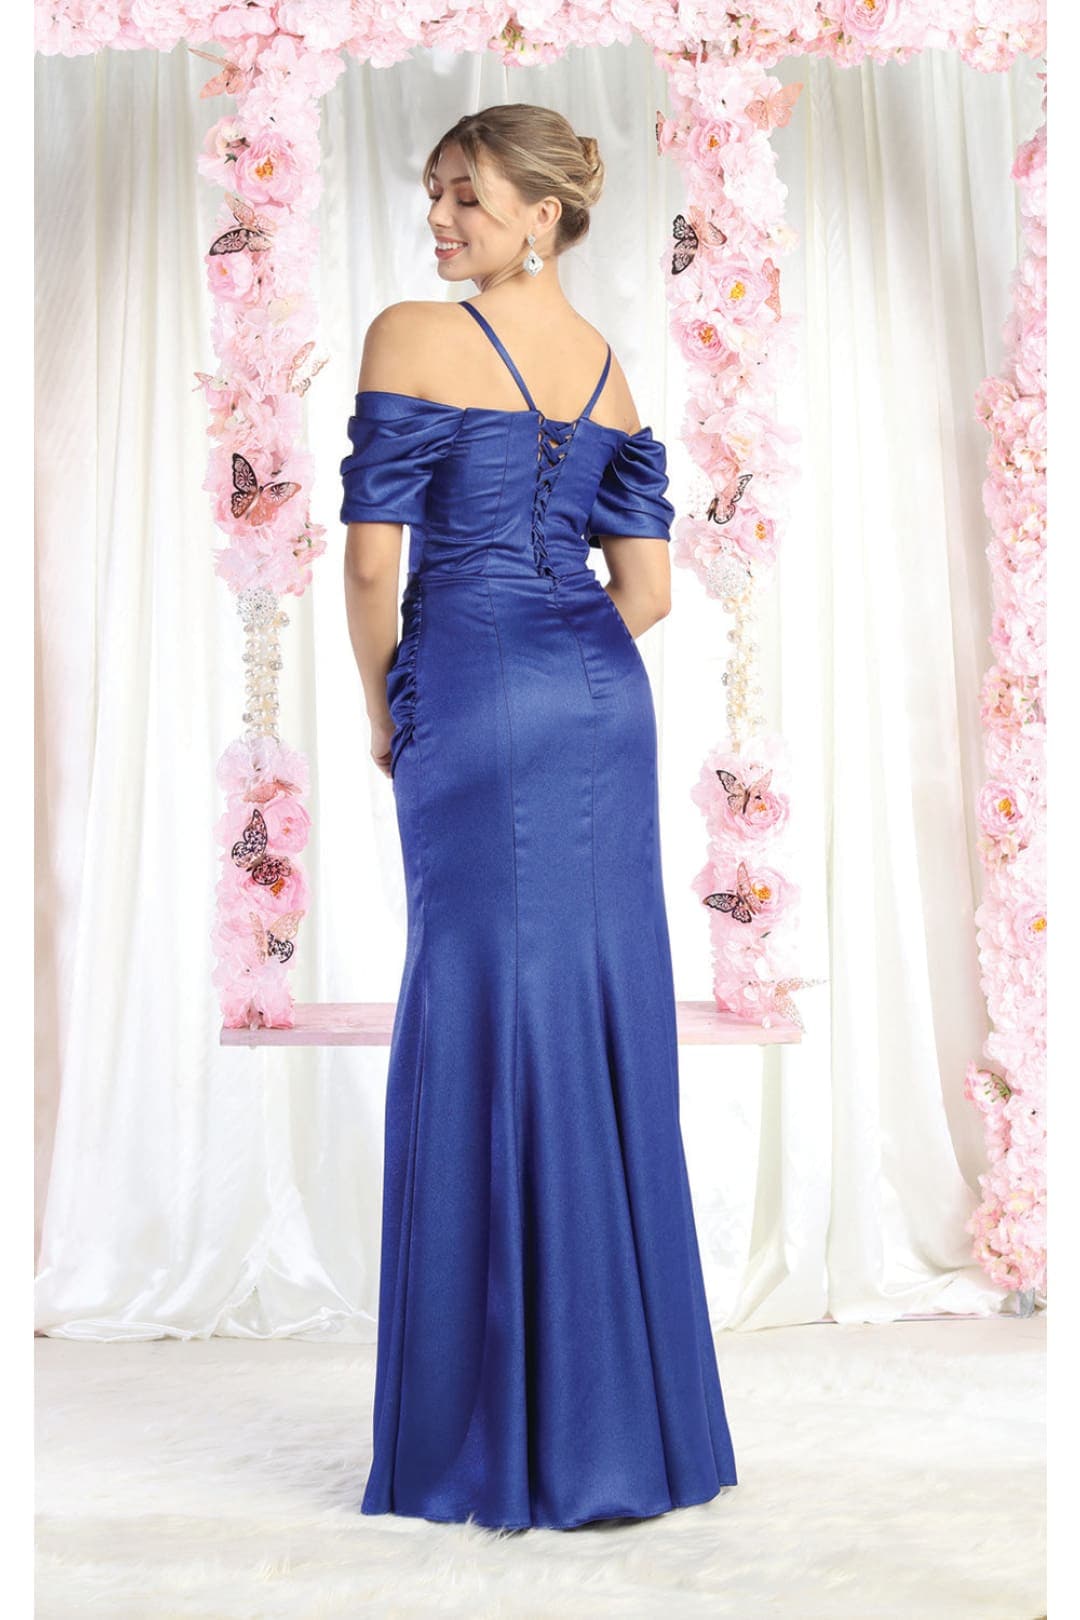 Royal Queen RQ8021 Cold Shoulder Sheath Prom Evening Gown - Dress